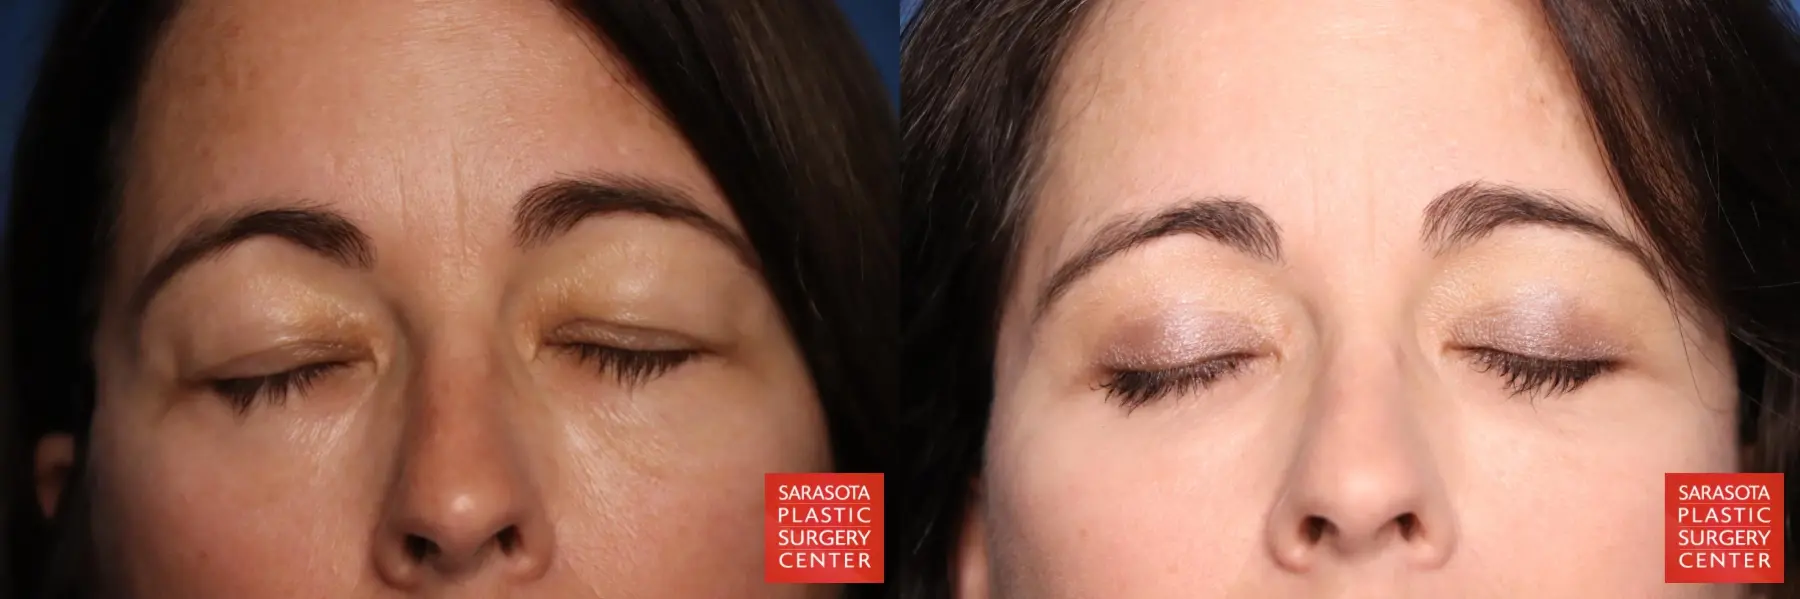 Eyelid Lift: Patient 3 - Before and After 3